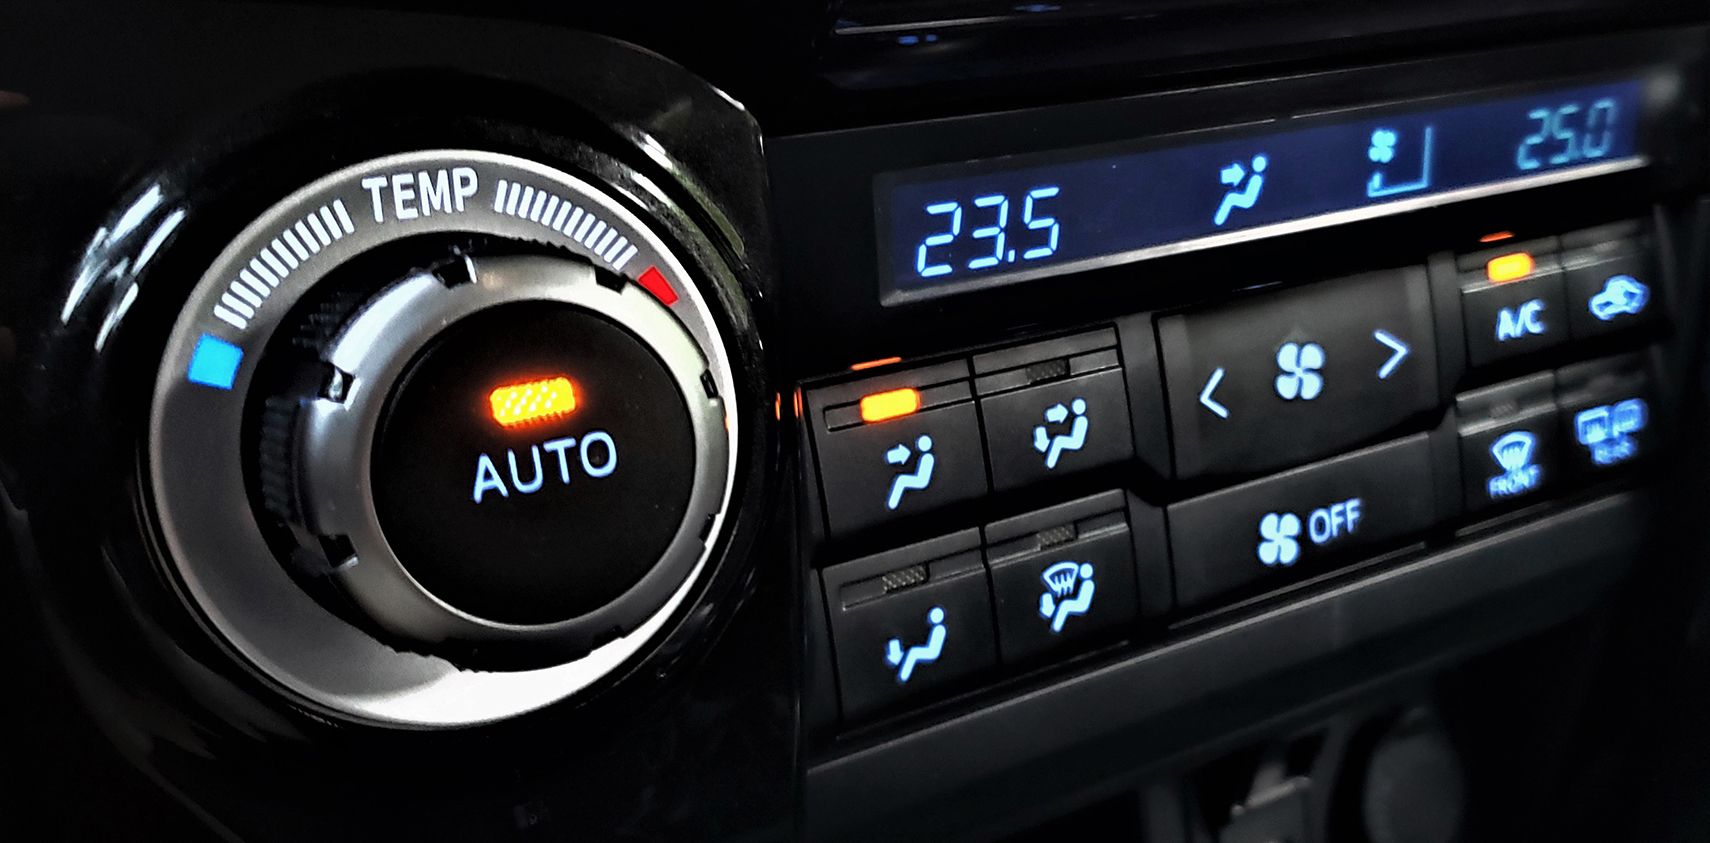 The 2020 Toyota 4Runner Venture Edition's buttons, knobs and switches are much better made than in previous generations.